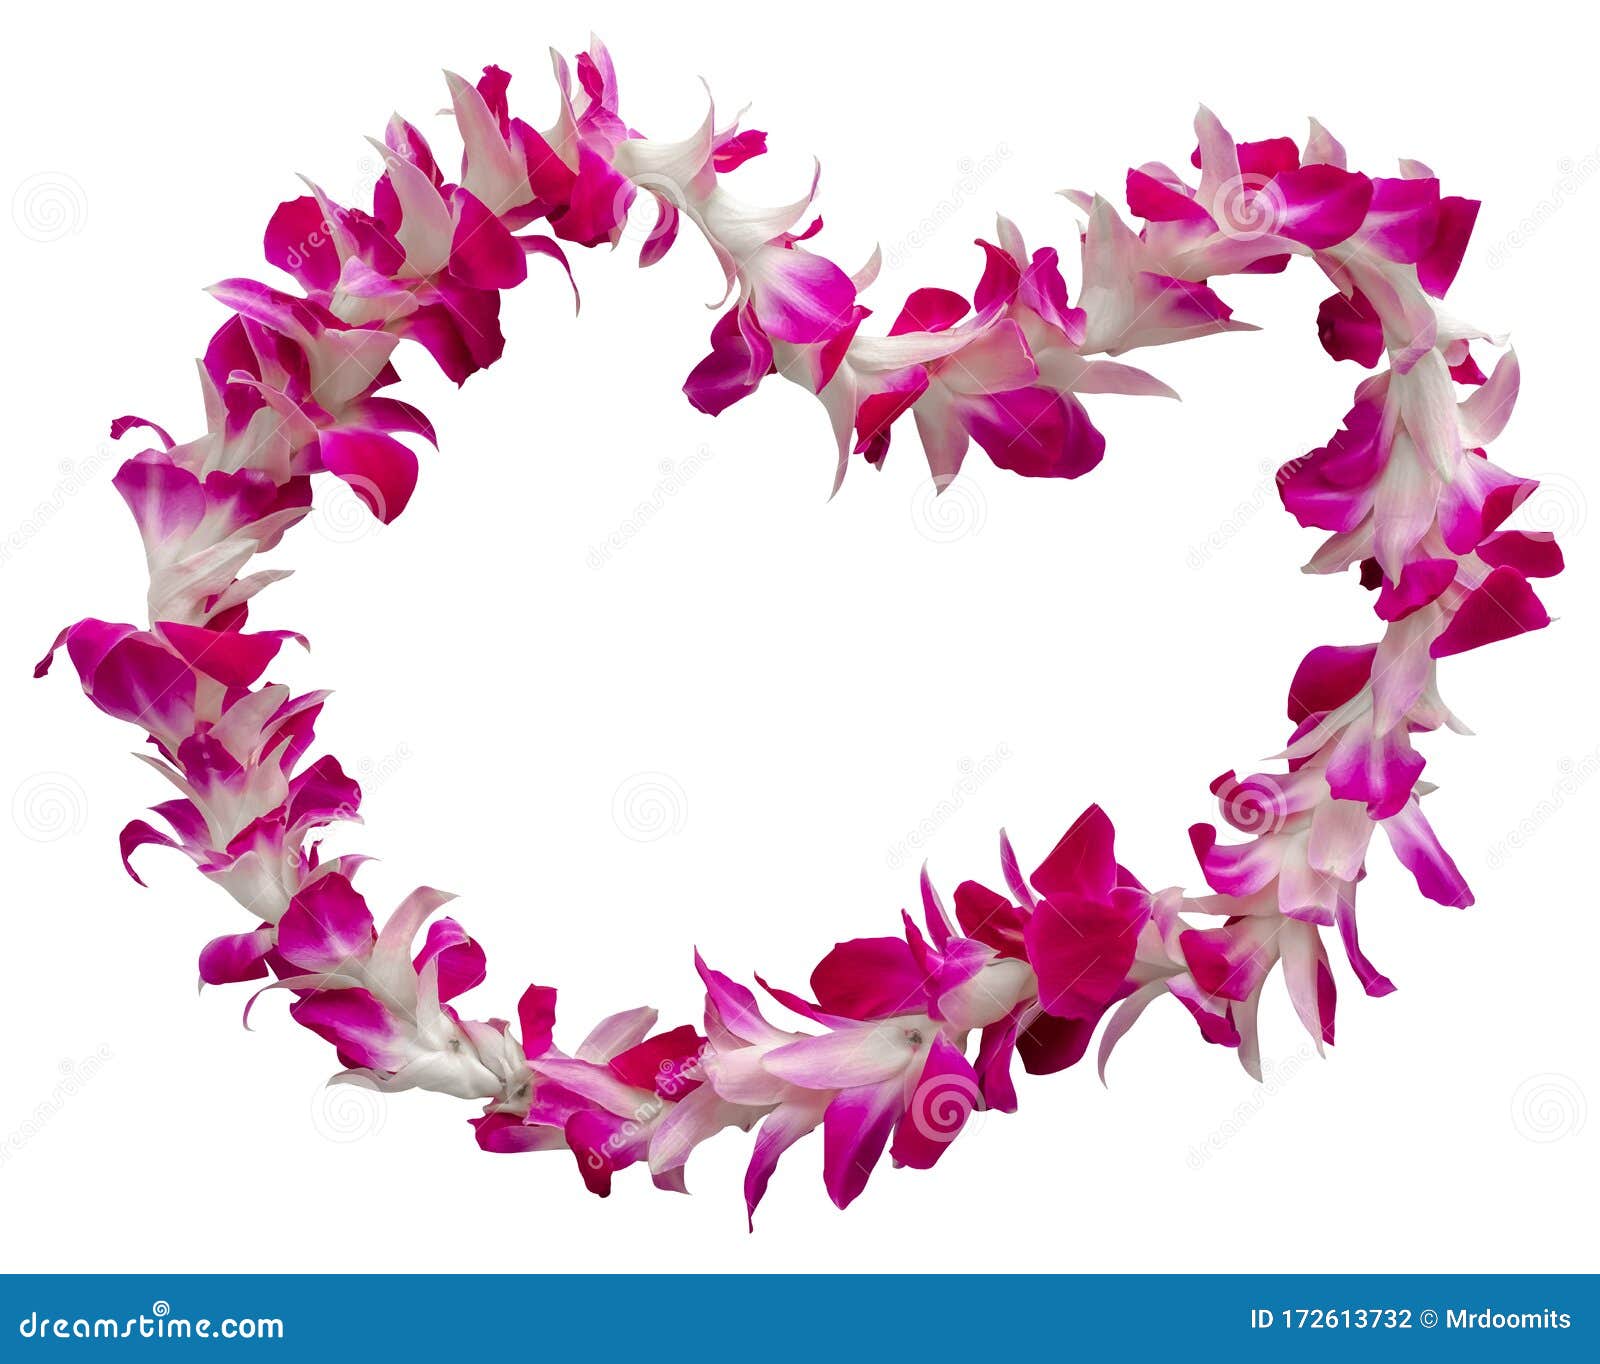 hawaii lei on a white background